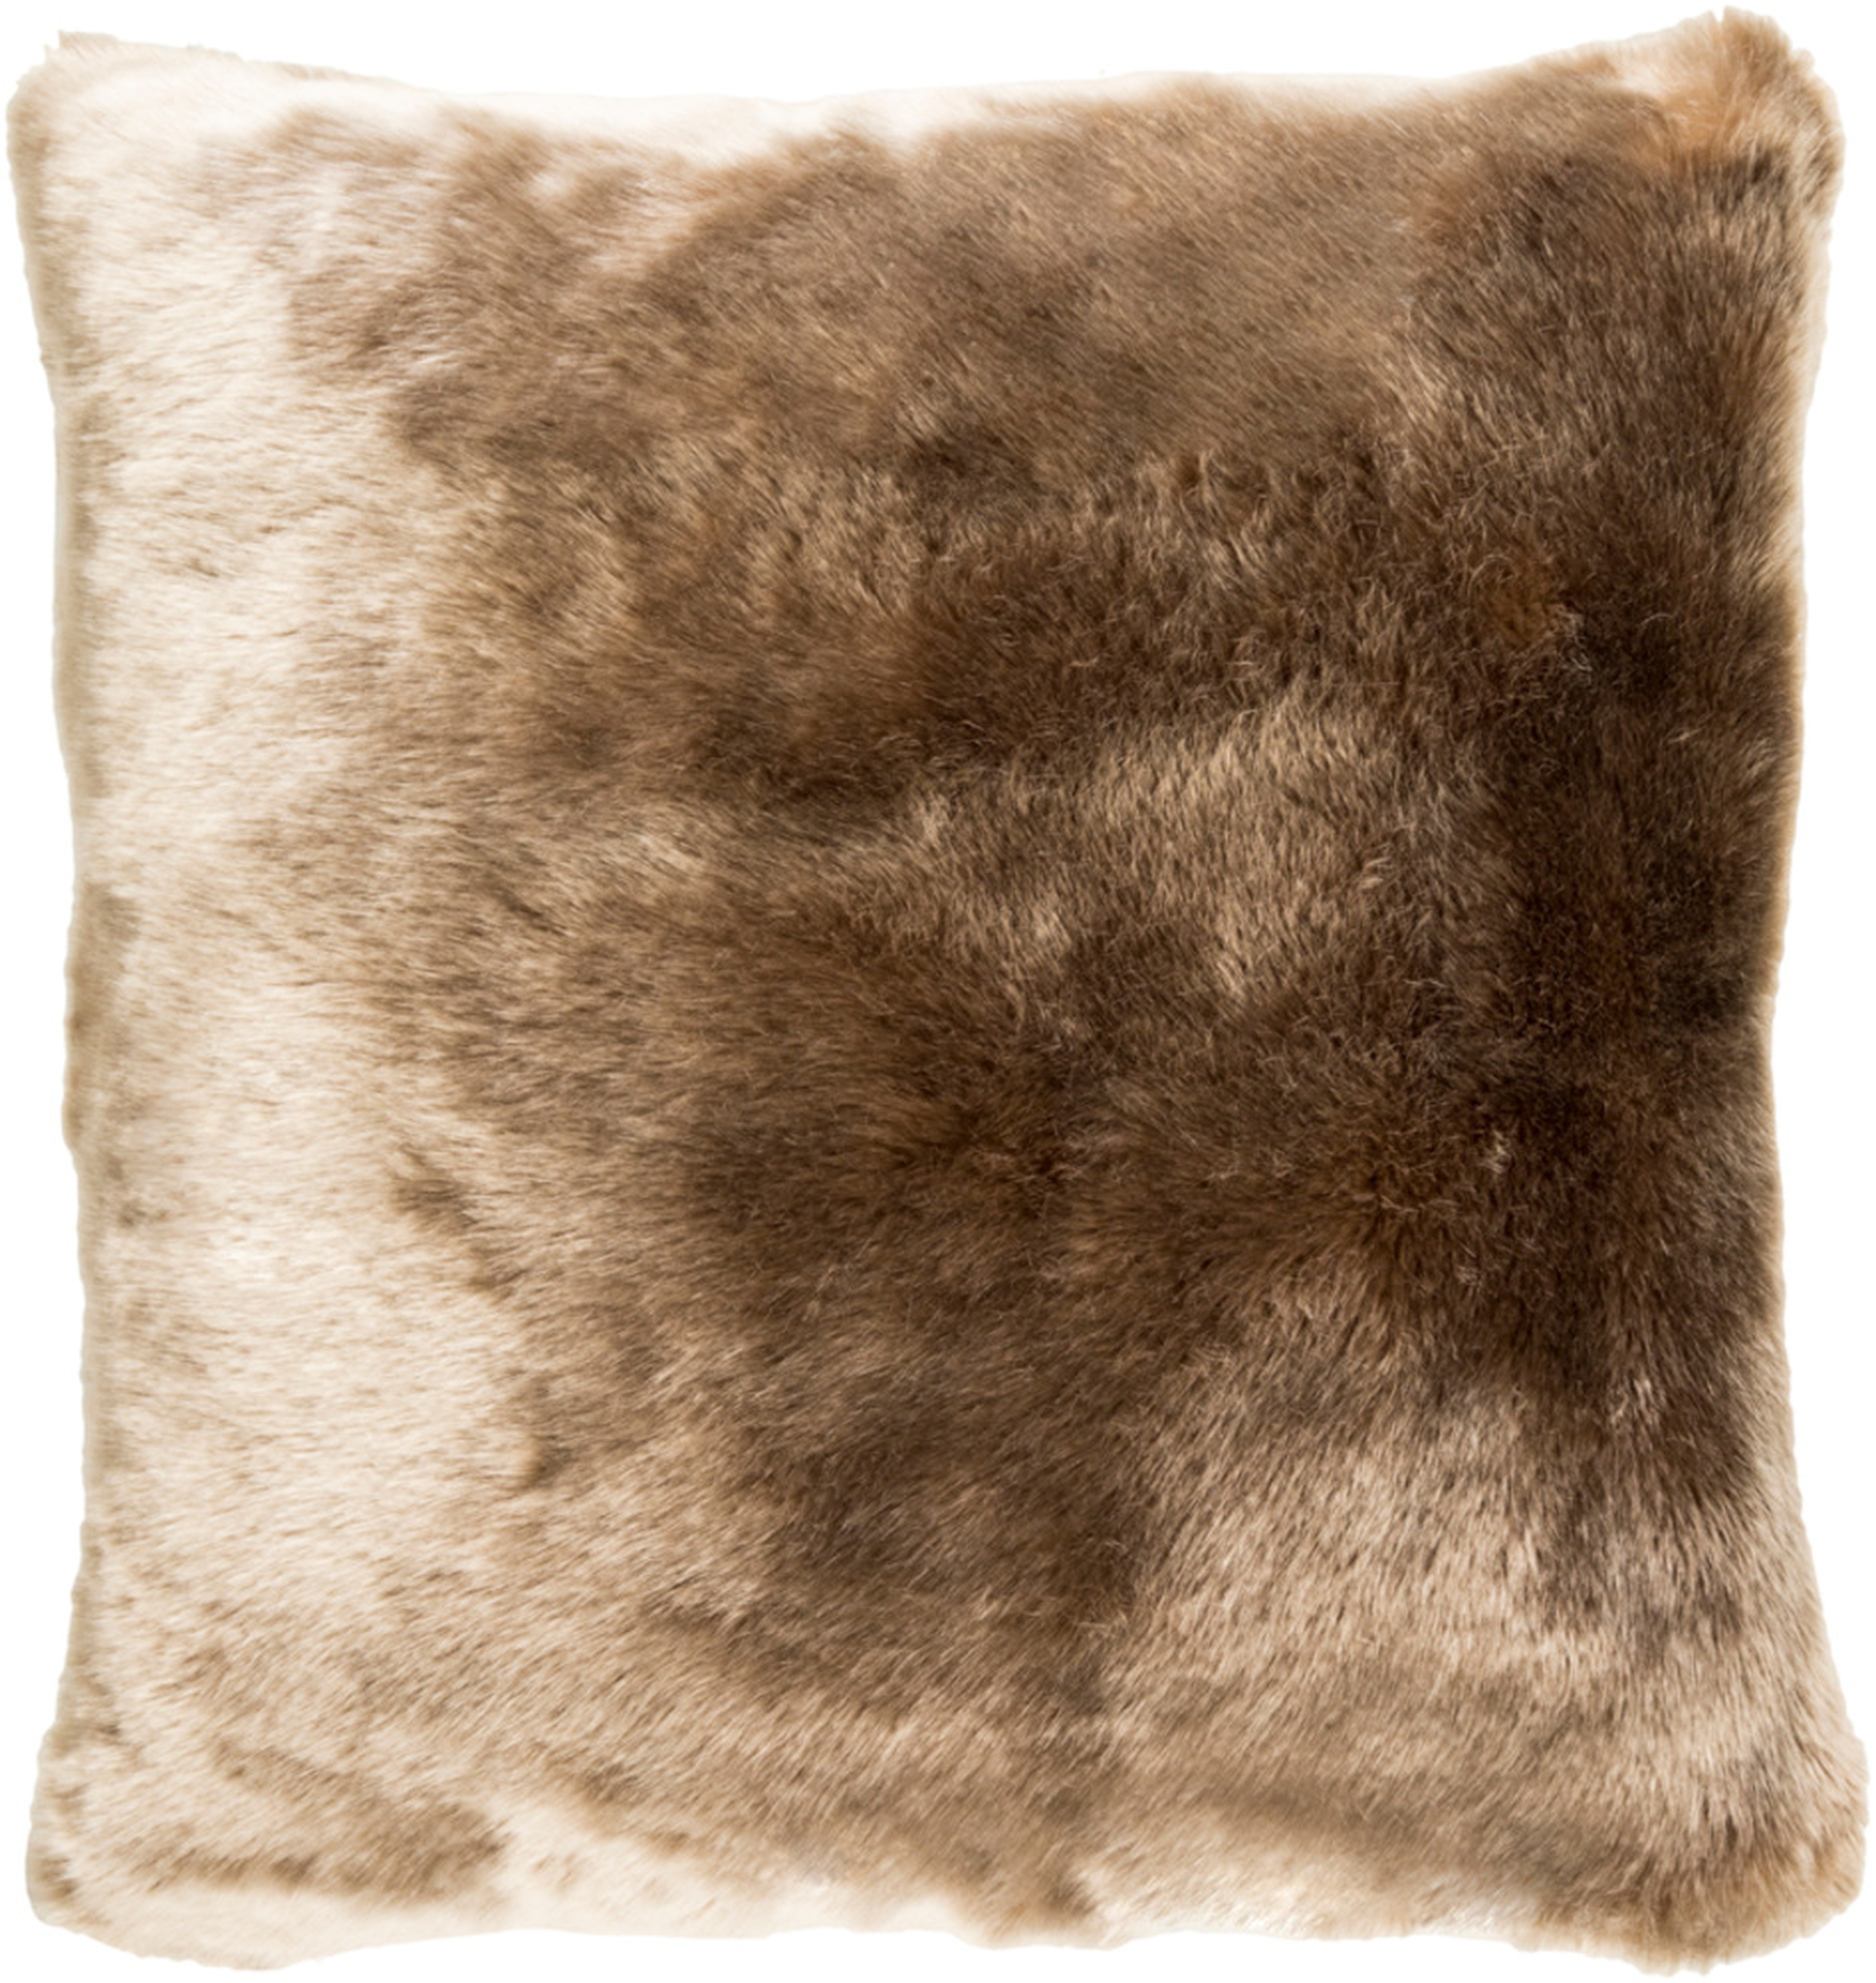 Faux Fur - Innu IU-001 - 20" x 20" - pillow cover only - Surya